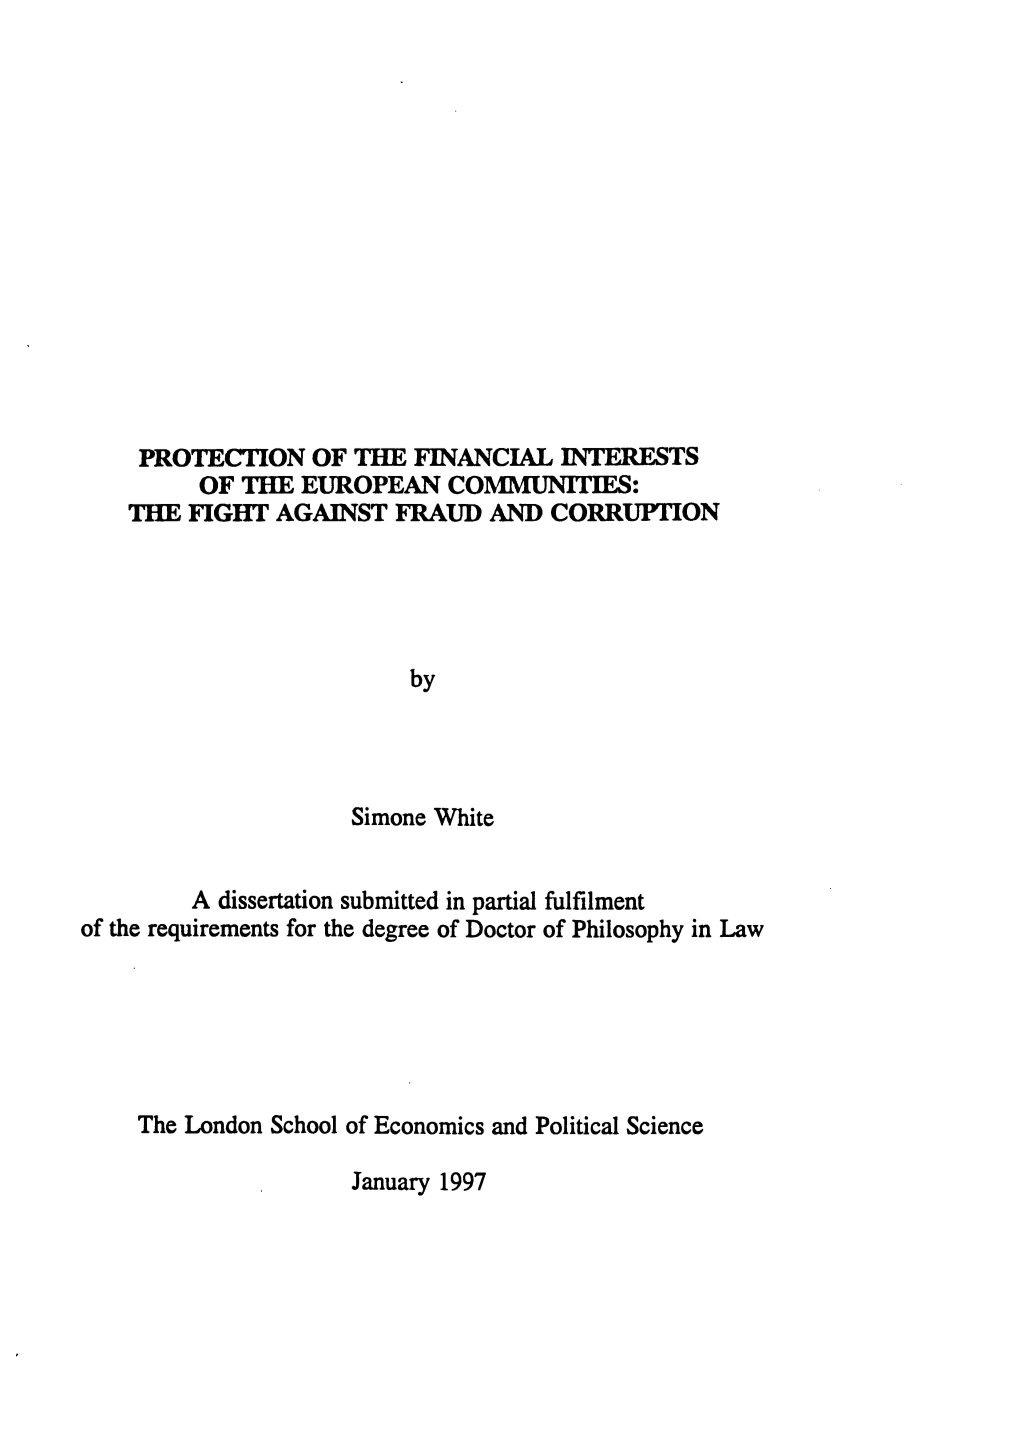 Protection of the Financial Interests of the European Communities: the Fight Against Fraud and Corruption